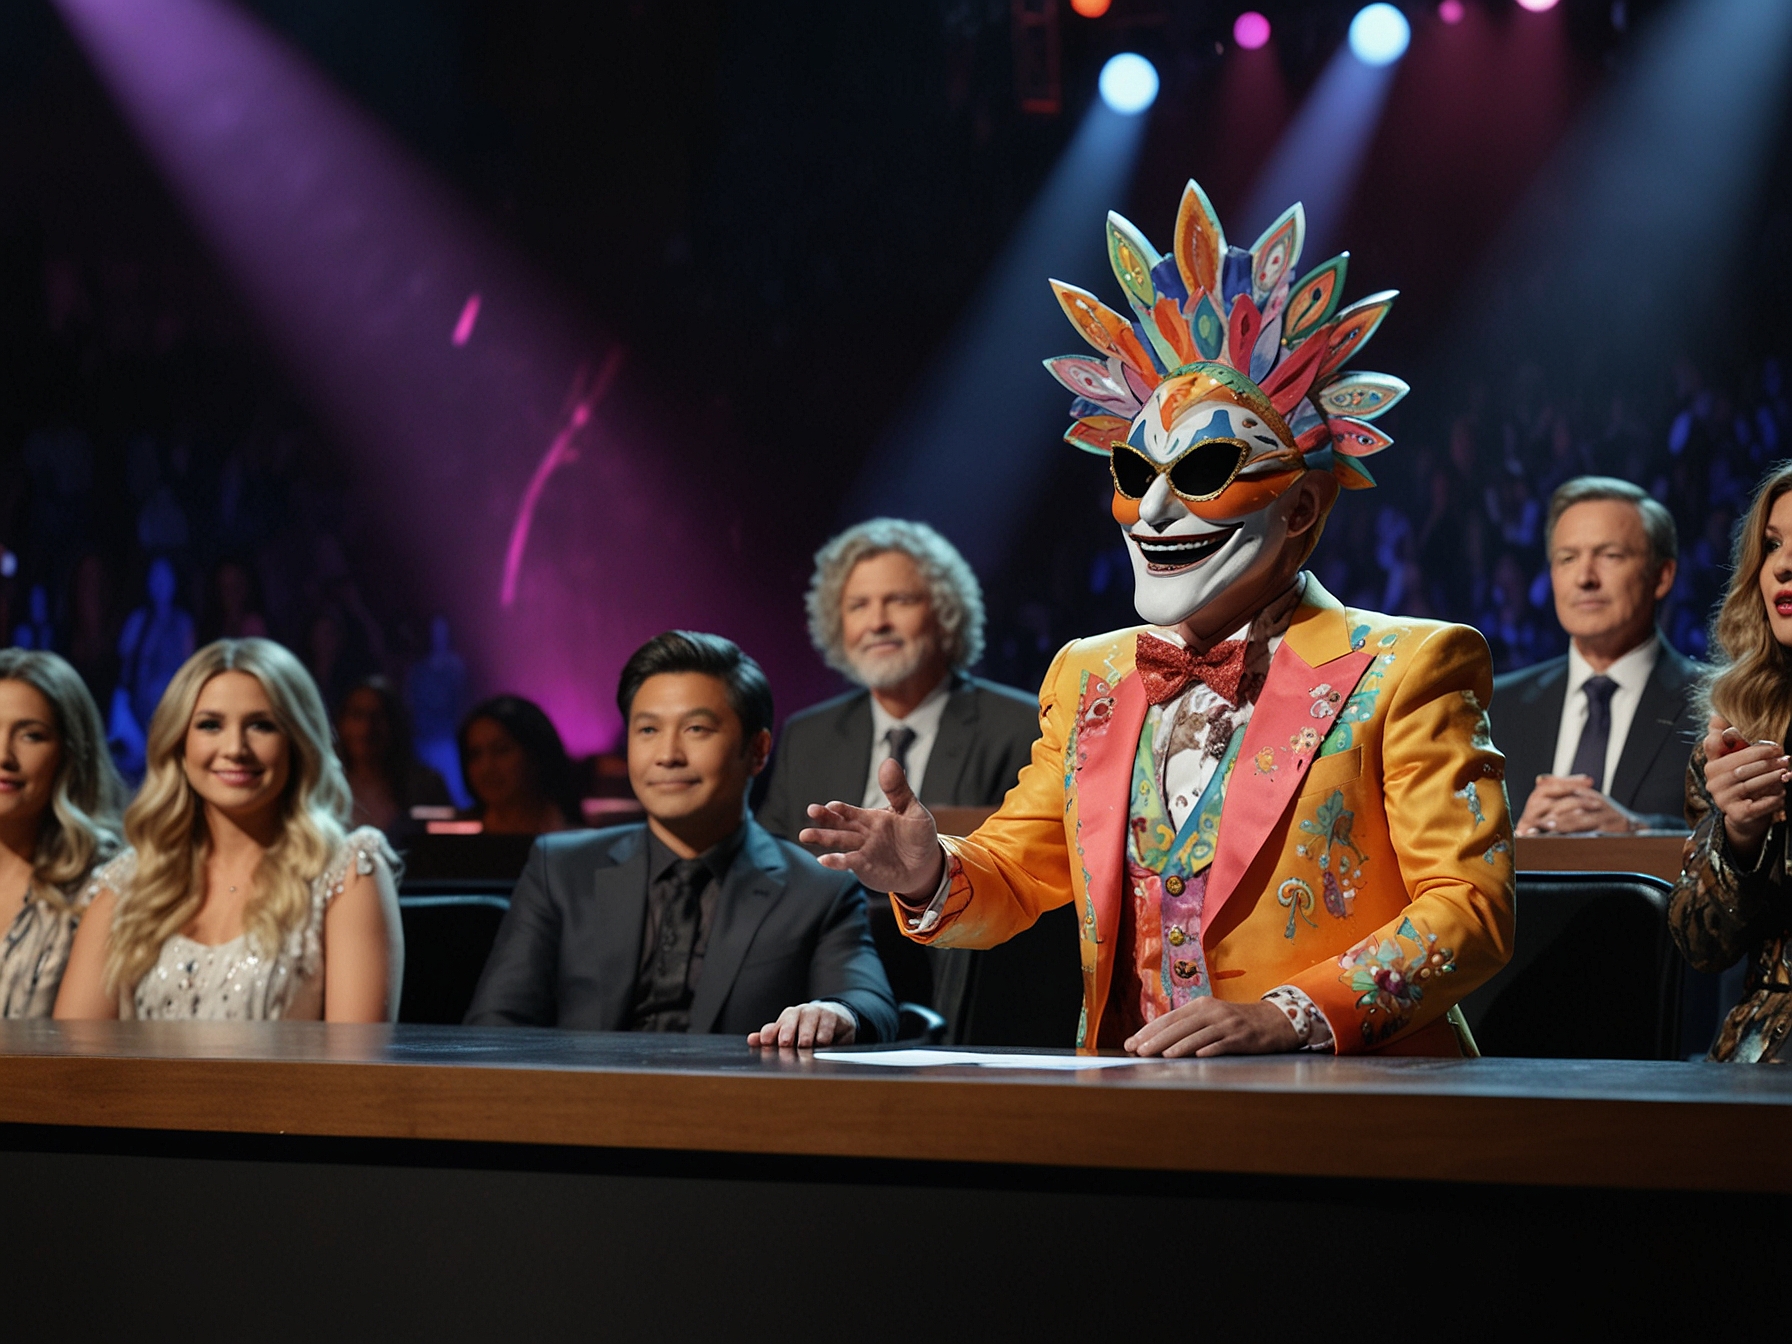 A colorful and intriguing still from 'The Masked Singer US' featuring a celebrity in an elaborate costume performing on stage, with the judges panel trying to guess their identity.